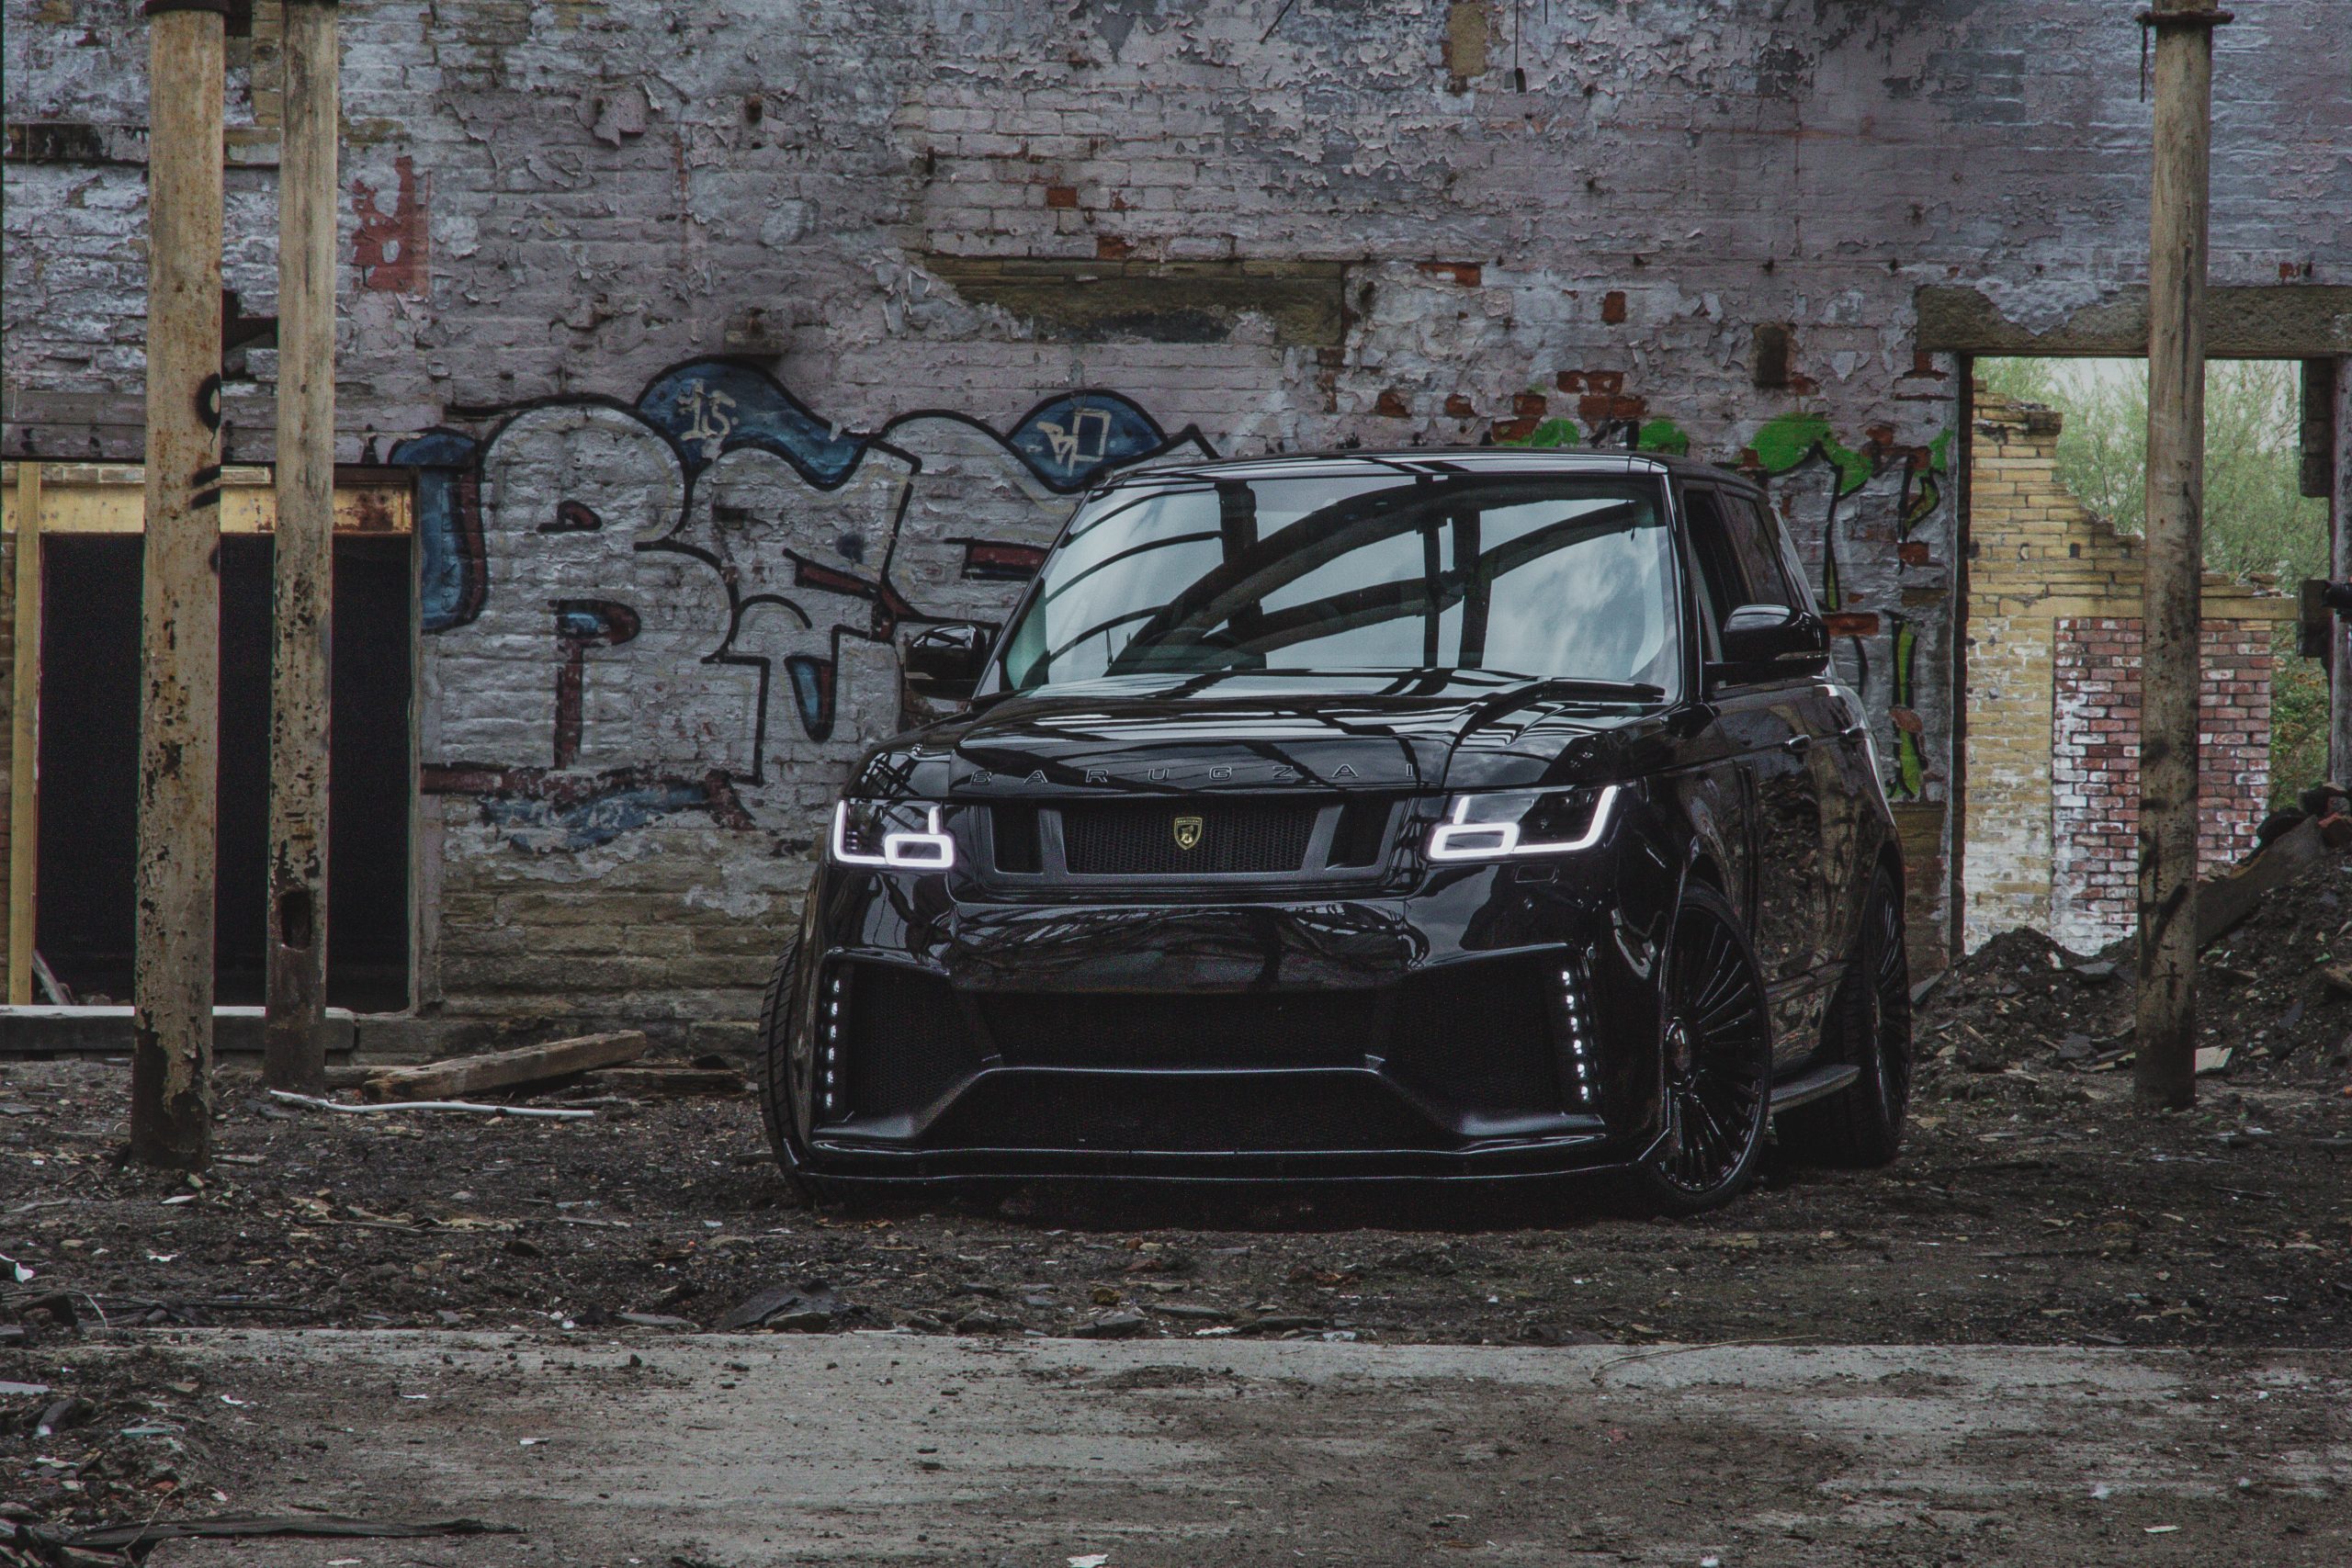 Check our price and buy Barugzai Bison body kit for Land Rover Range Rover Vogue (2019+)